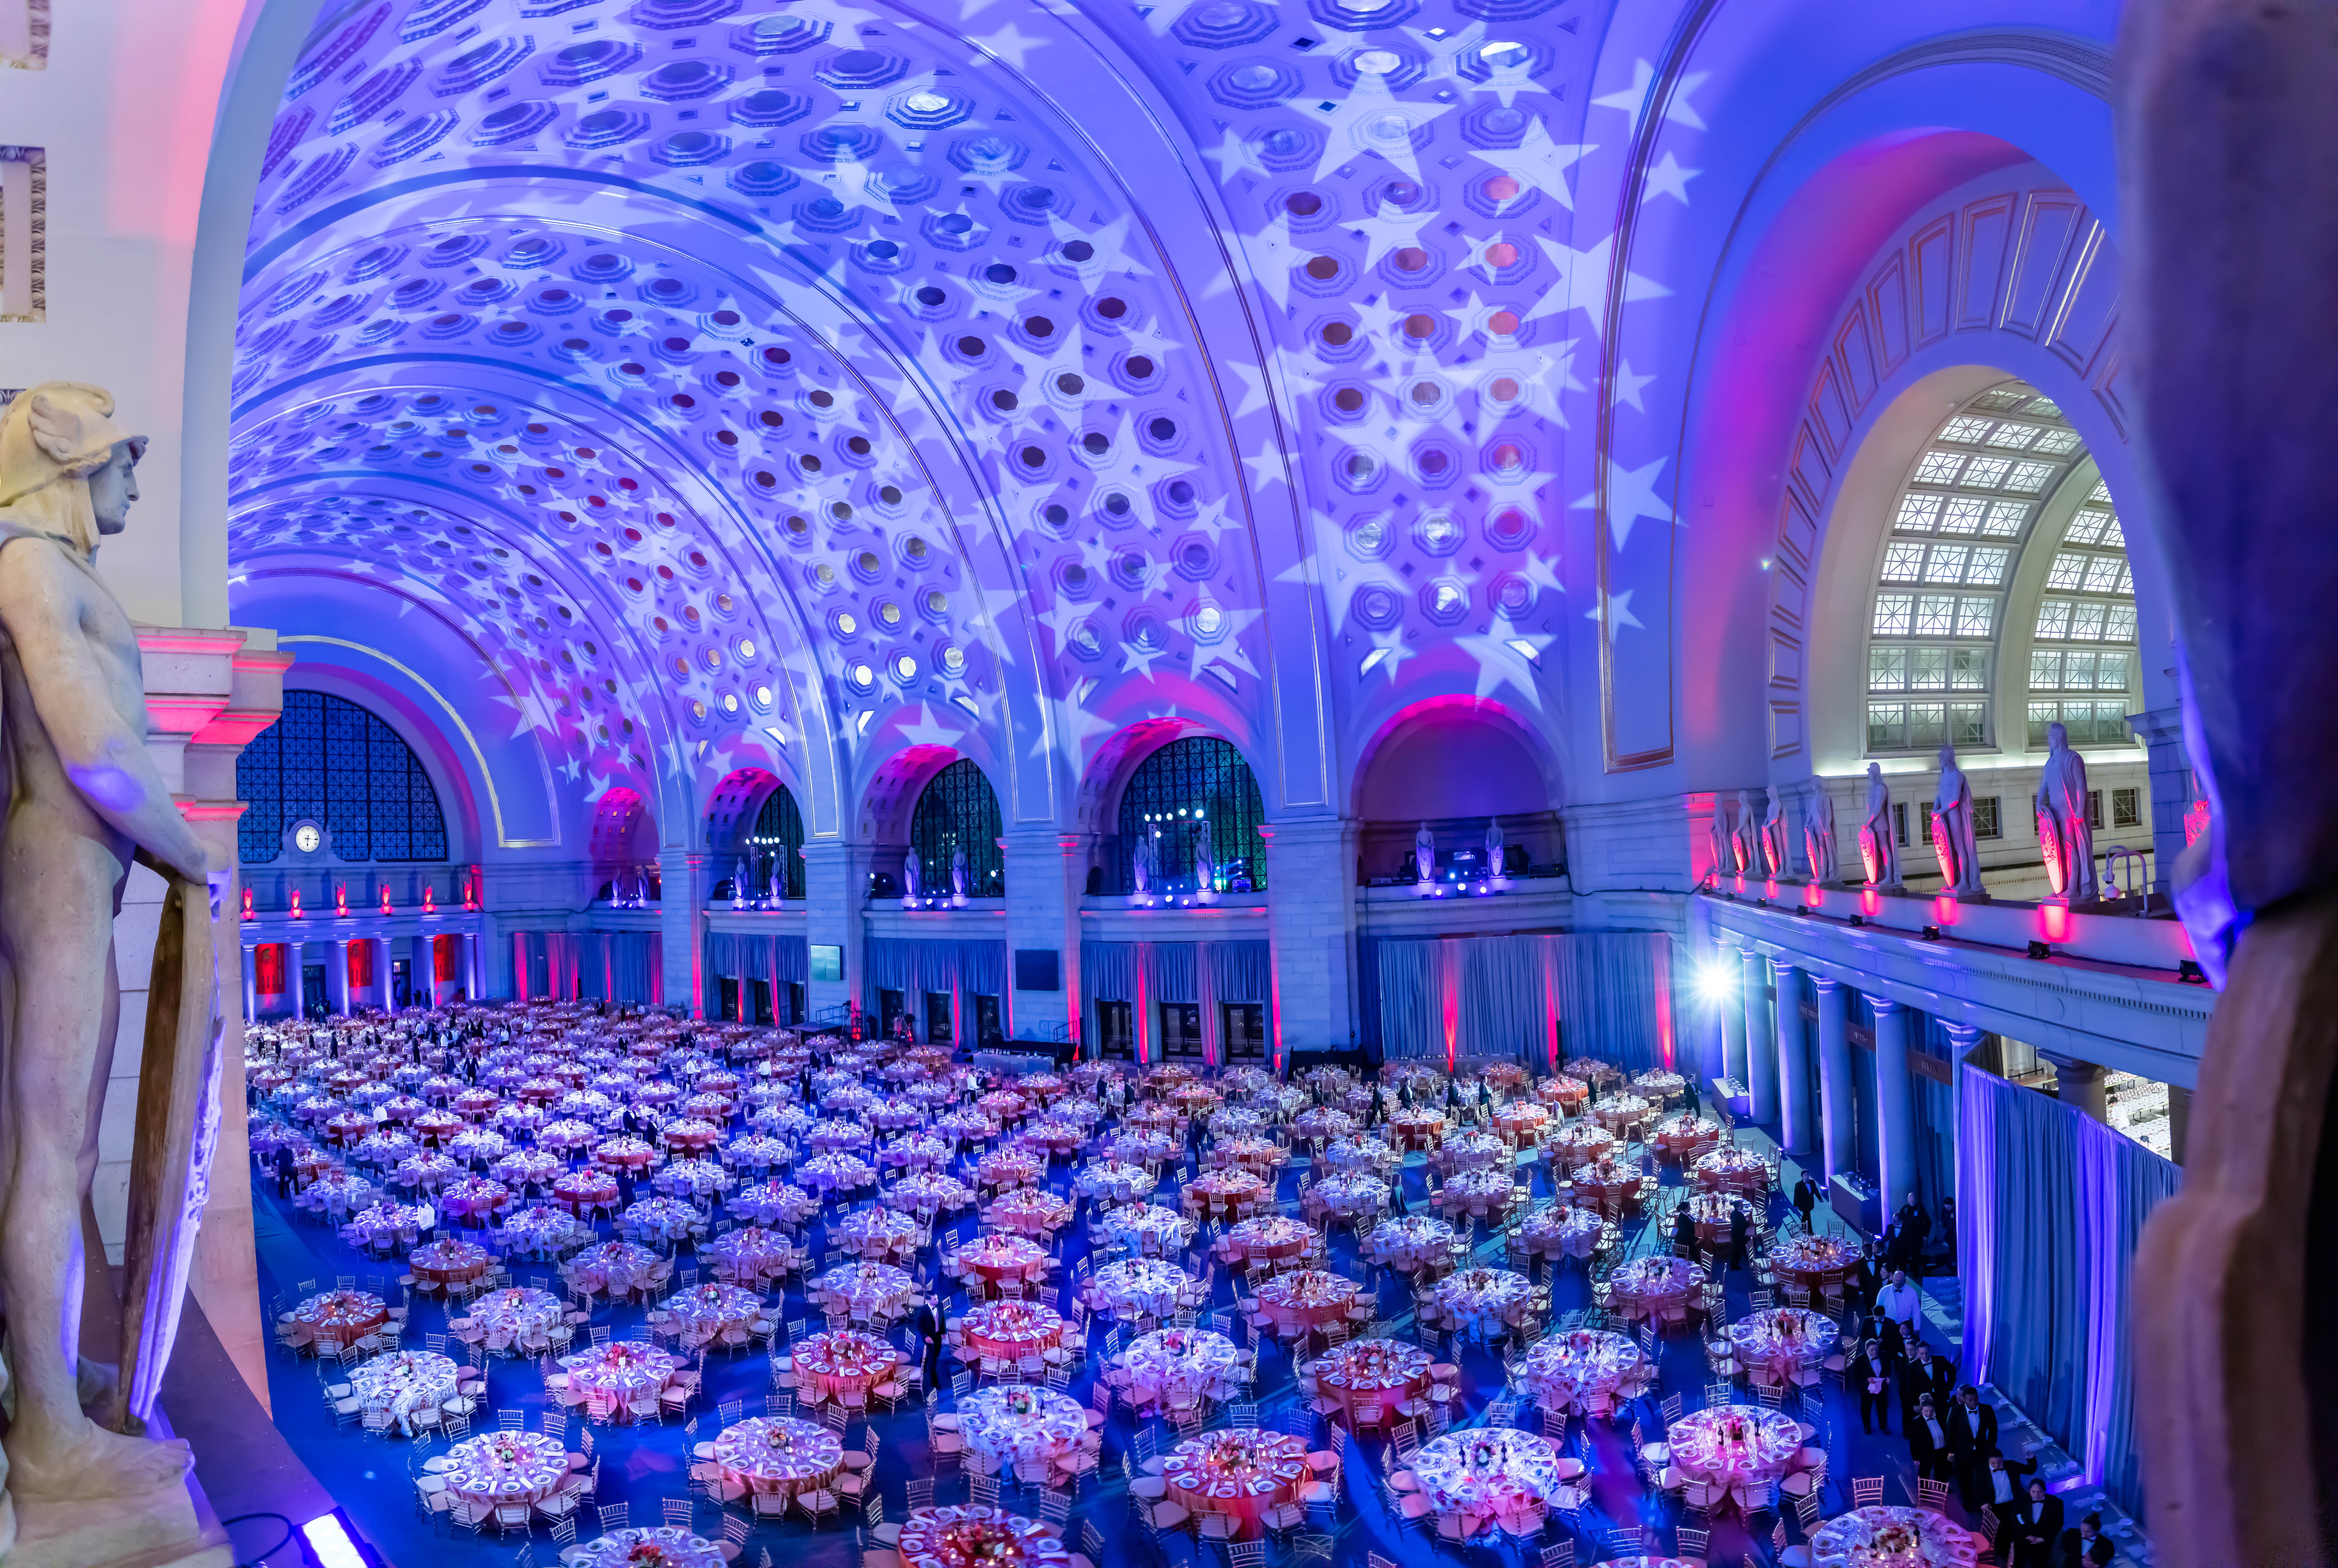 Corporate Event in Main Hall featuring a Seated Dinner; with Red and Blue Up-Lighting and White Stars Projected onto the Ceiling.